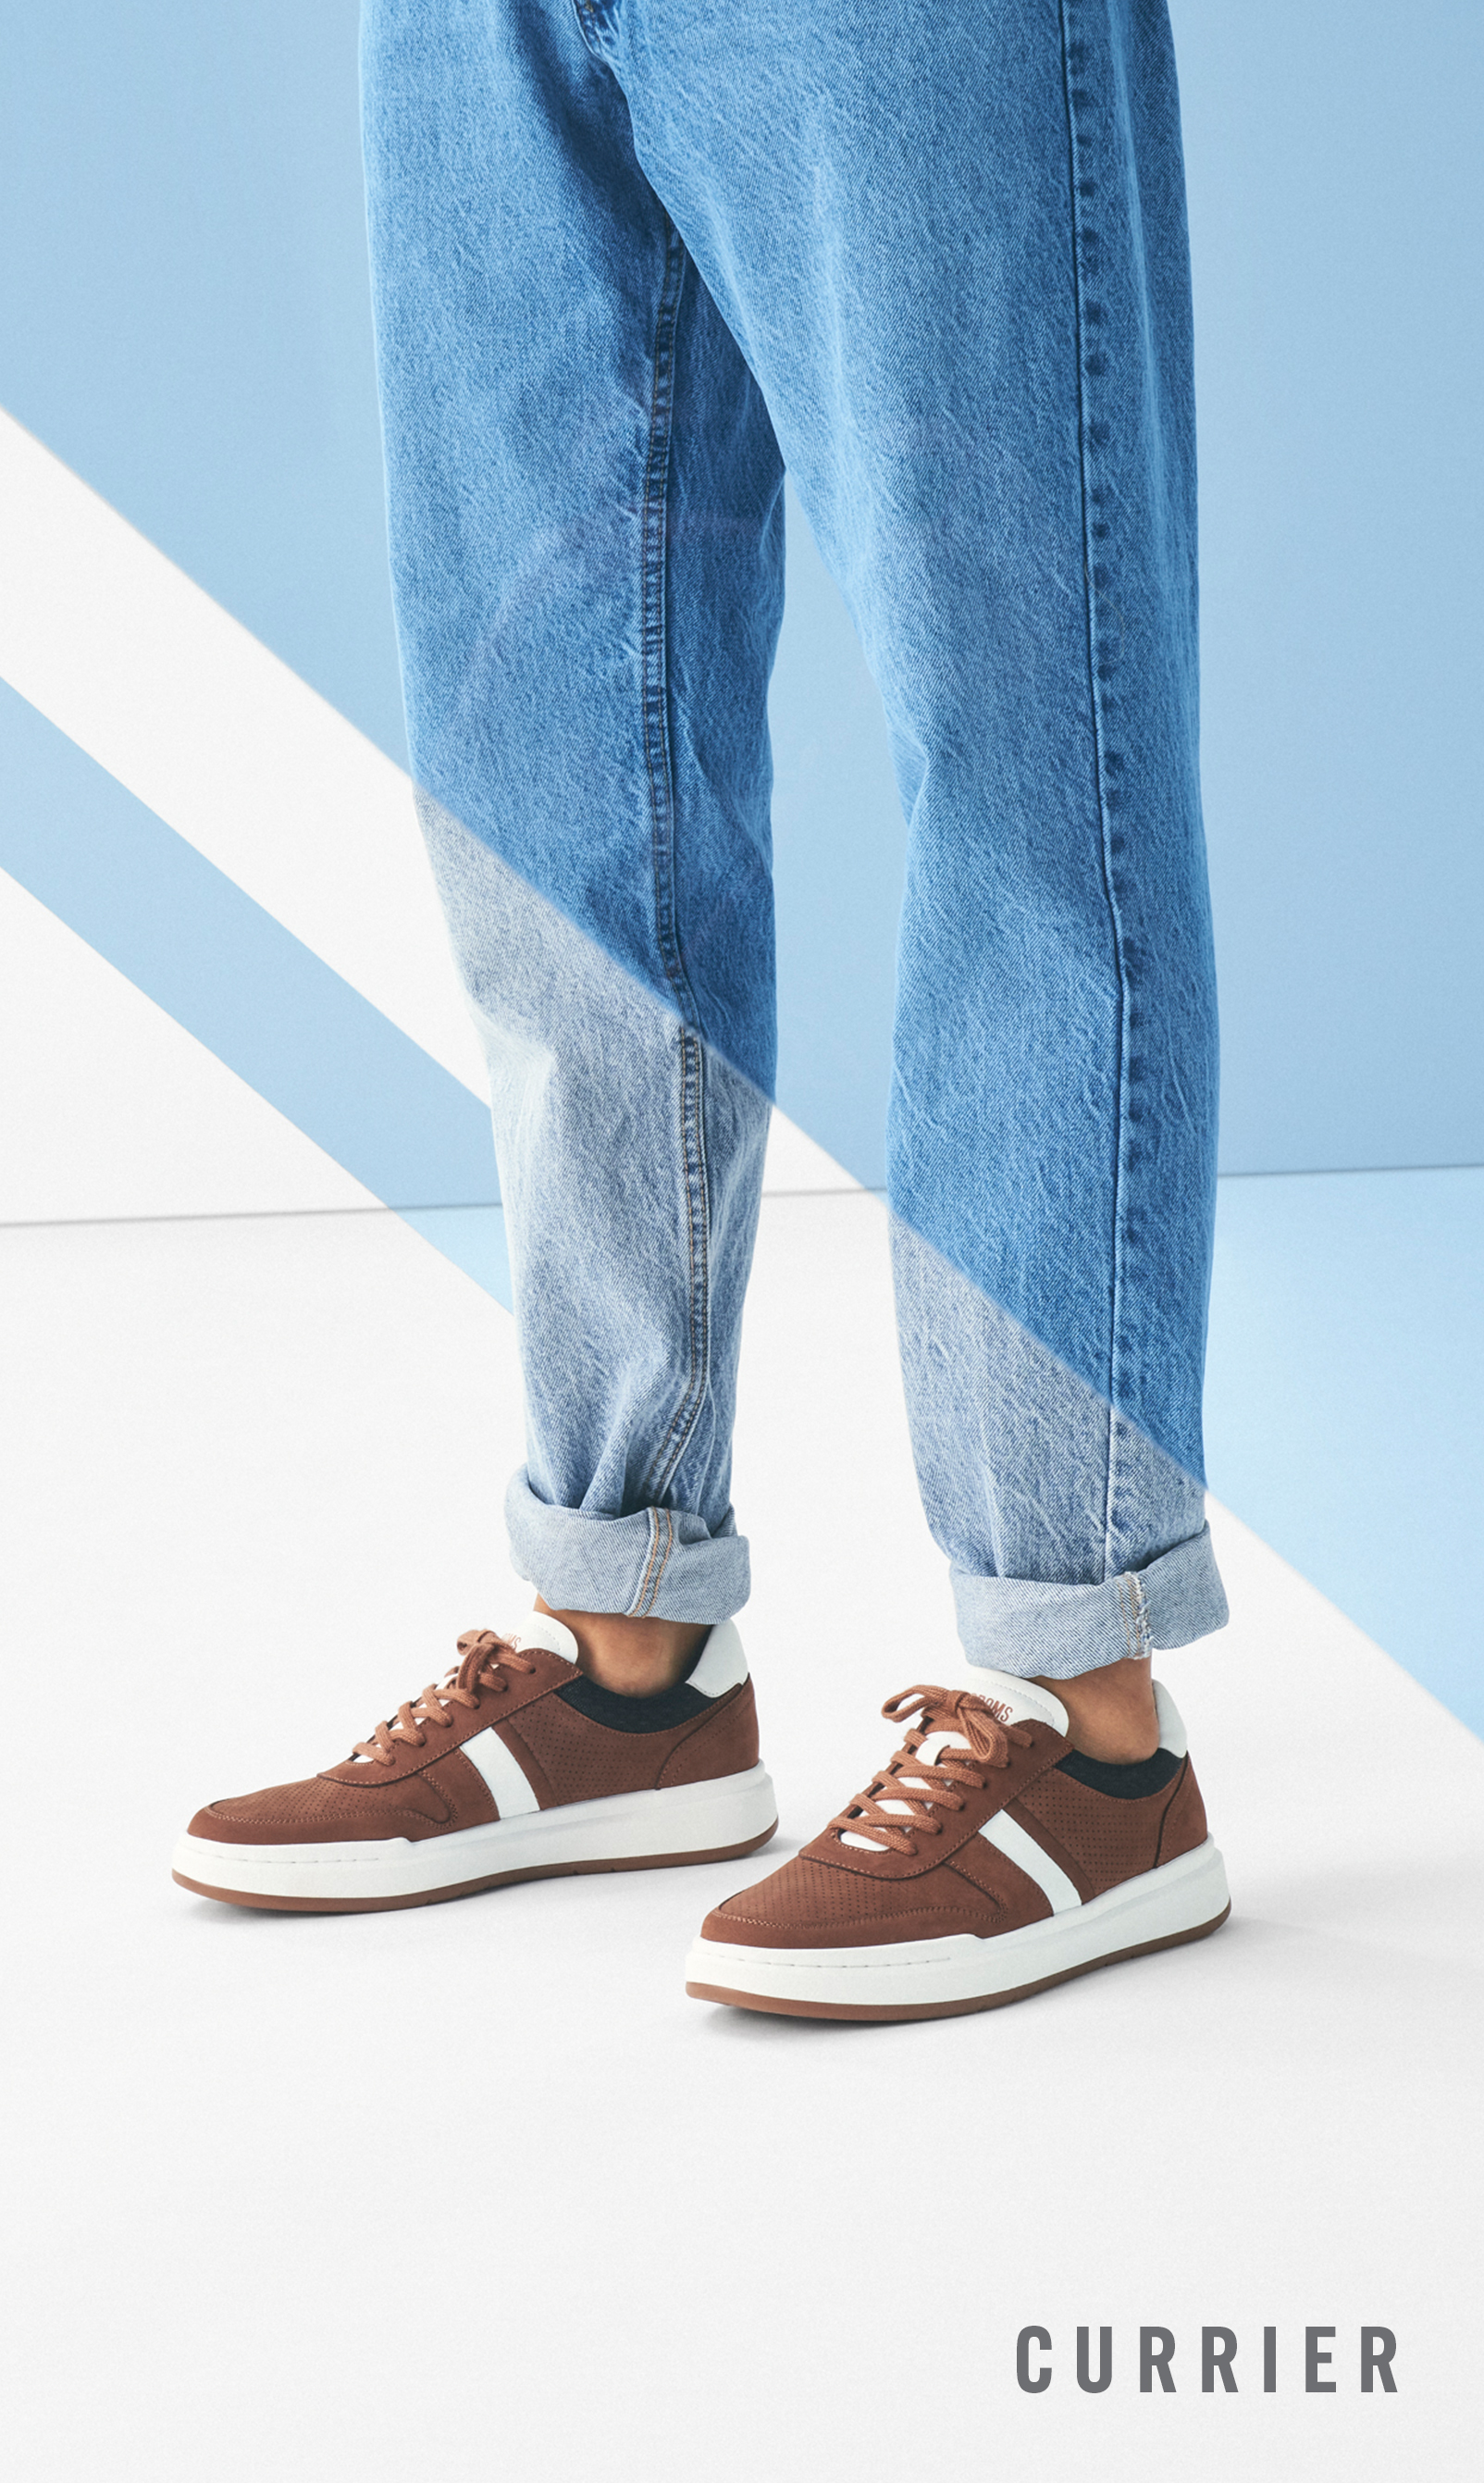  Image features the Currier sneaker in cognac.